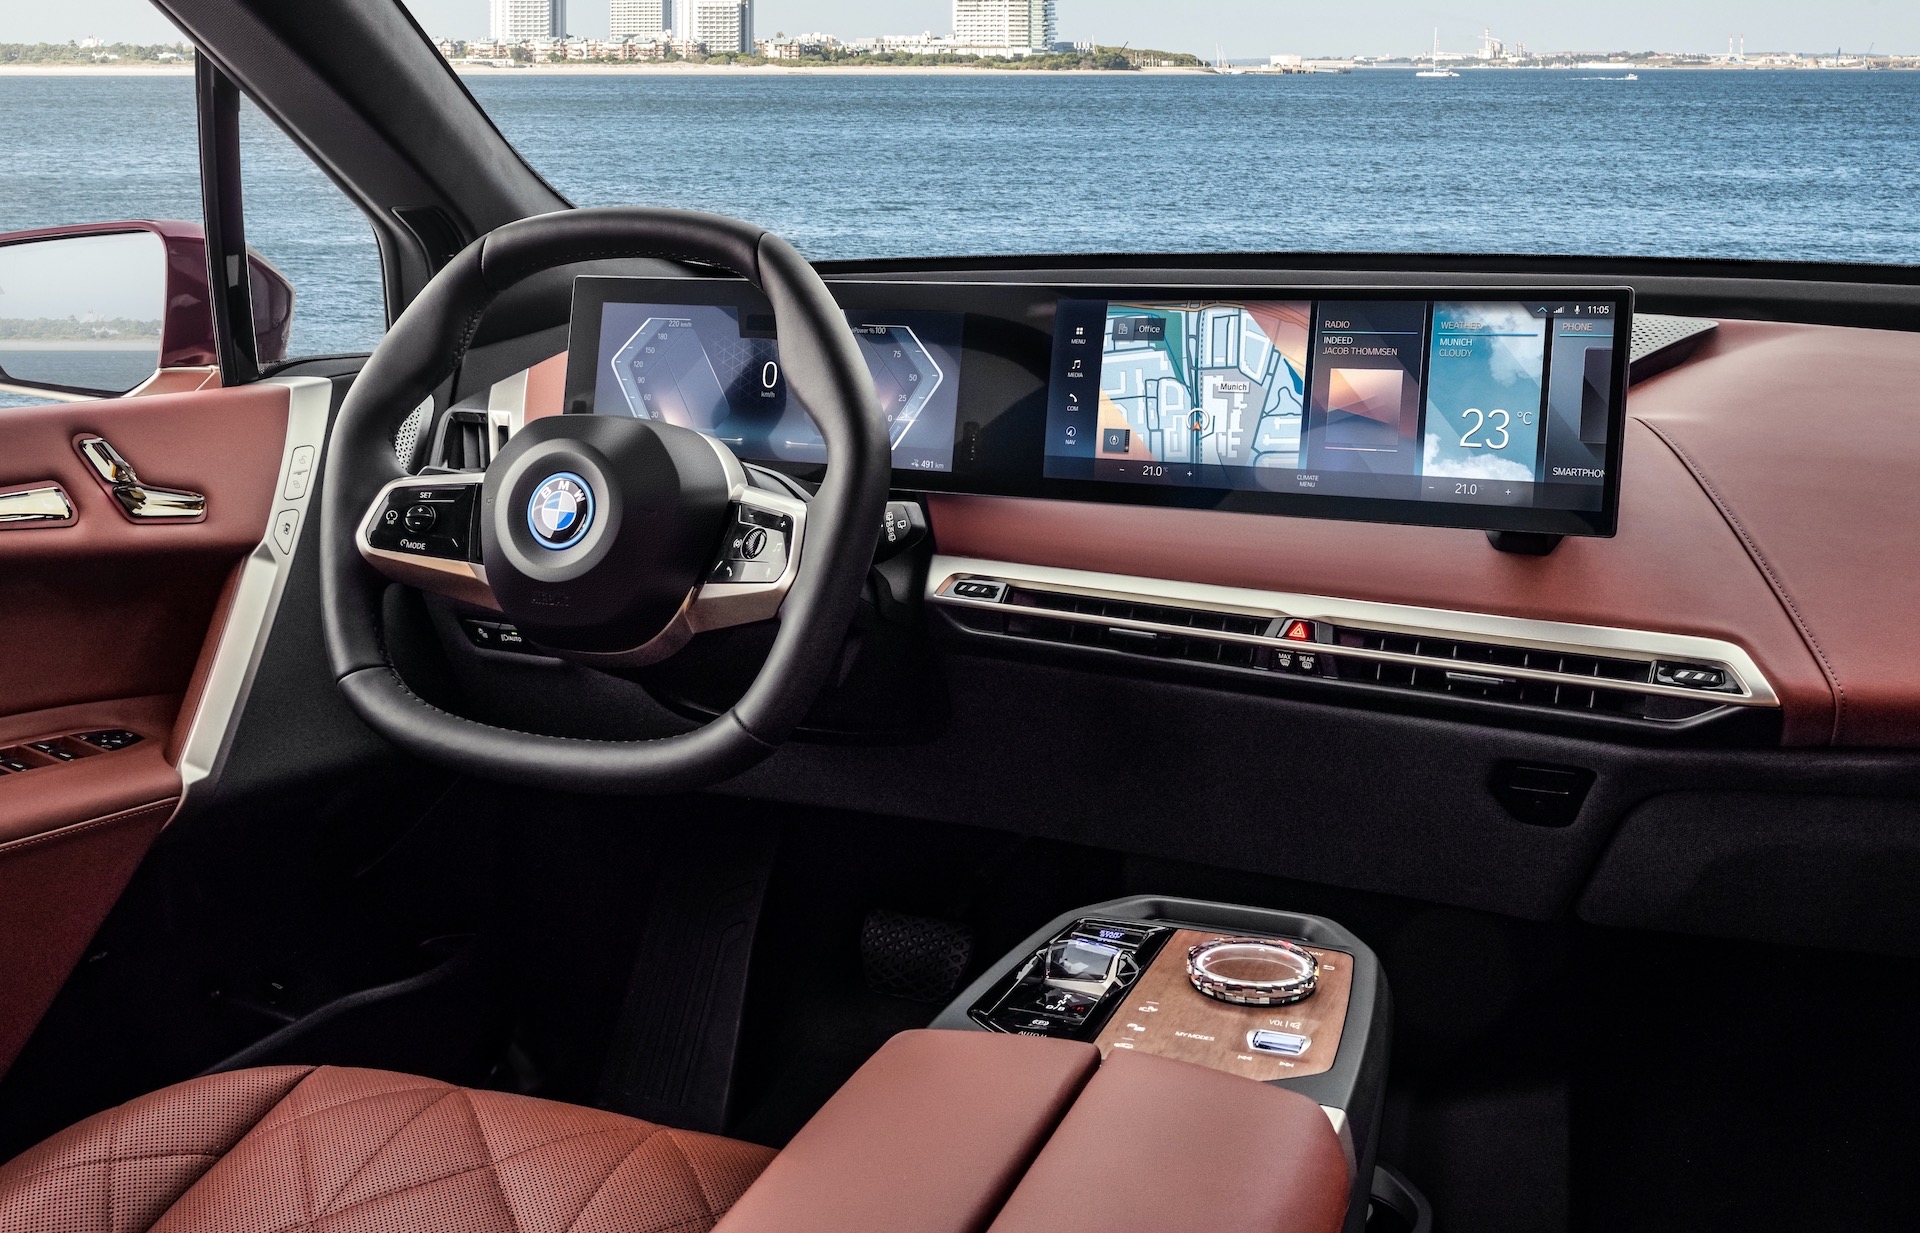 BMW unveils new iDrive with Operating System 8.0